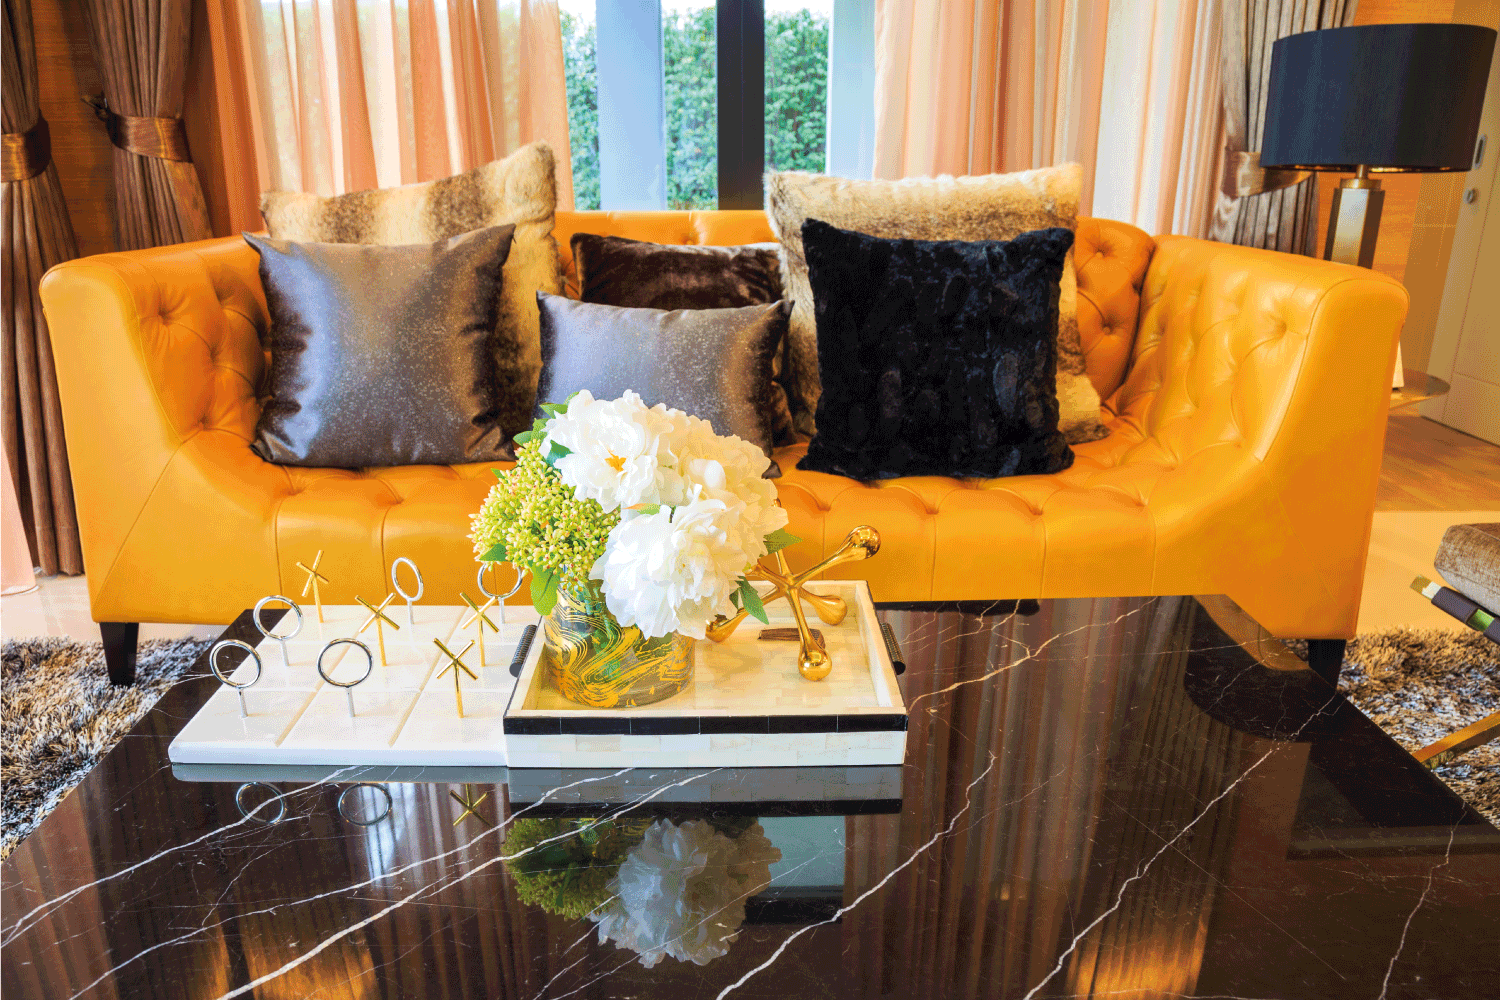 artificial flowers in a pot on a black marble table and pillows on a amber sofa with a lamp and curtain. swept angled track sofa arm